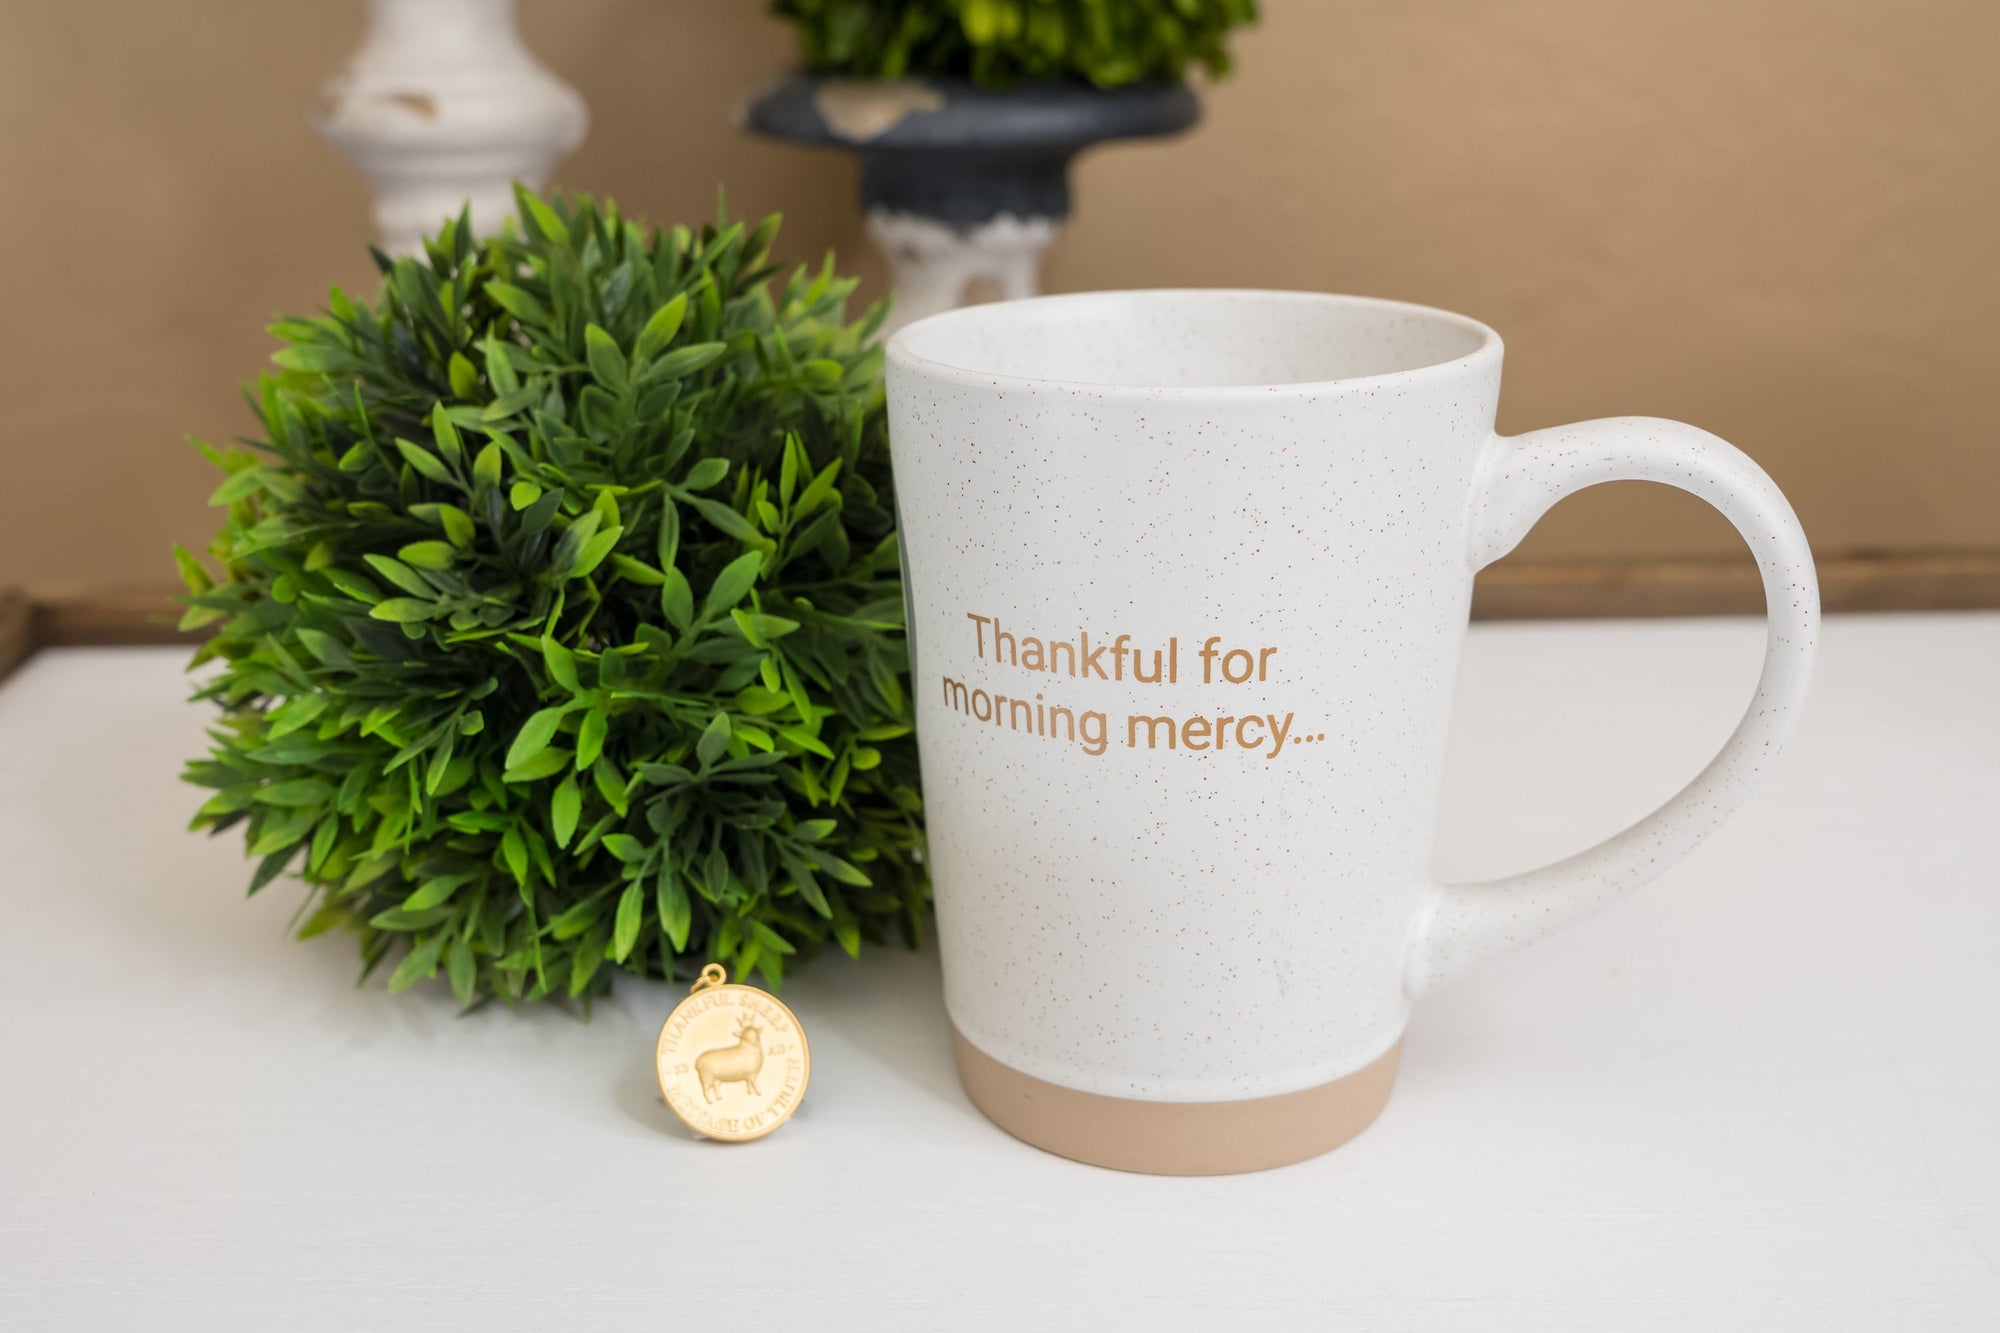 THANKFUL SHEEP SPECKLED CLAY MUG THANKFUL FOR MORNING MERCY...